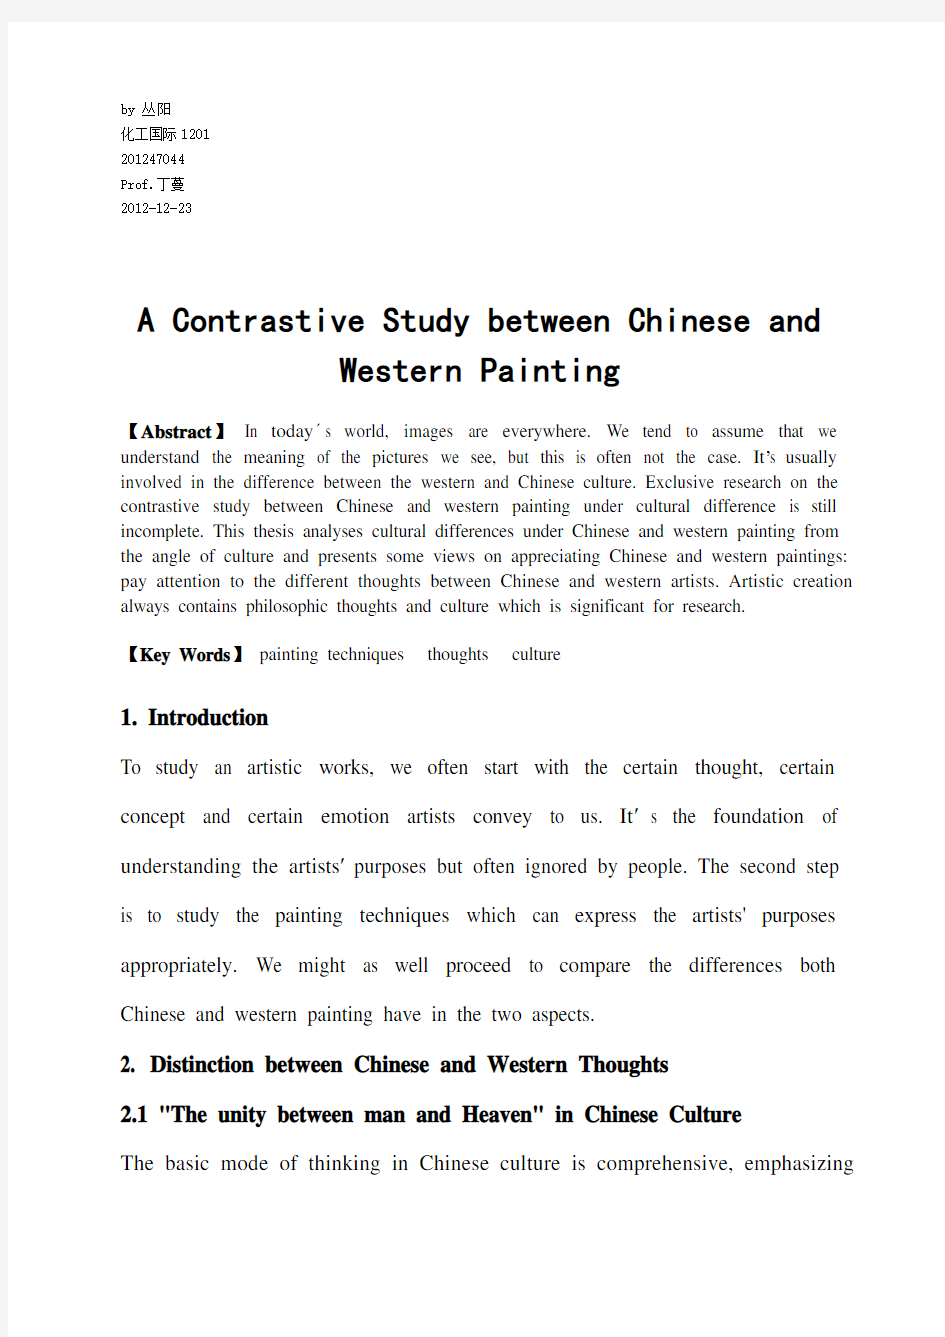 A Contrastive Study between Chinese and Western Painting